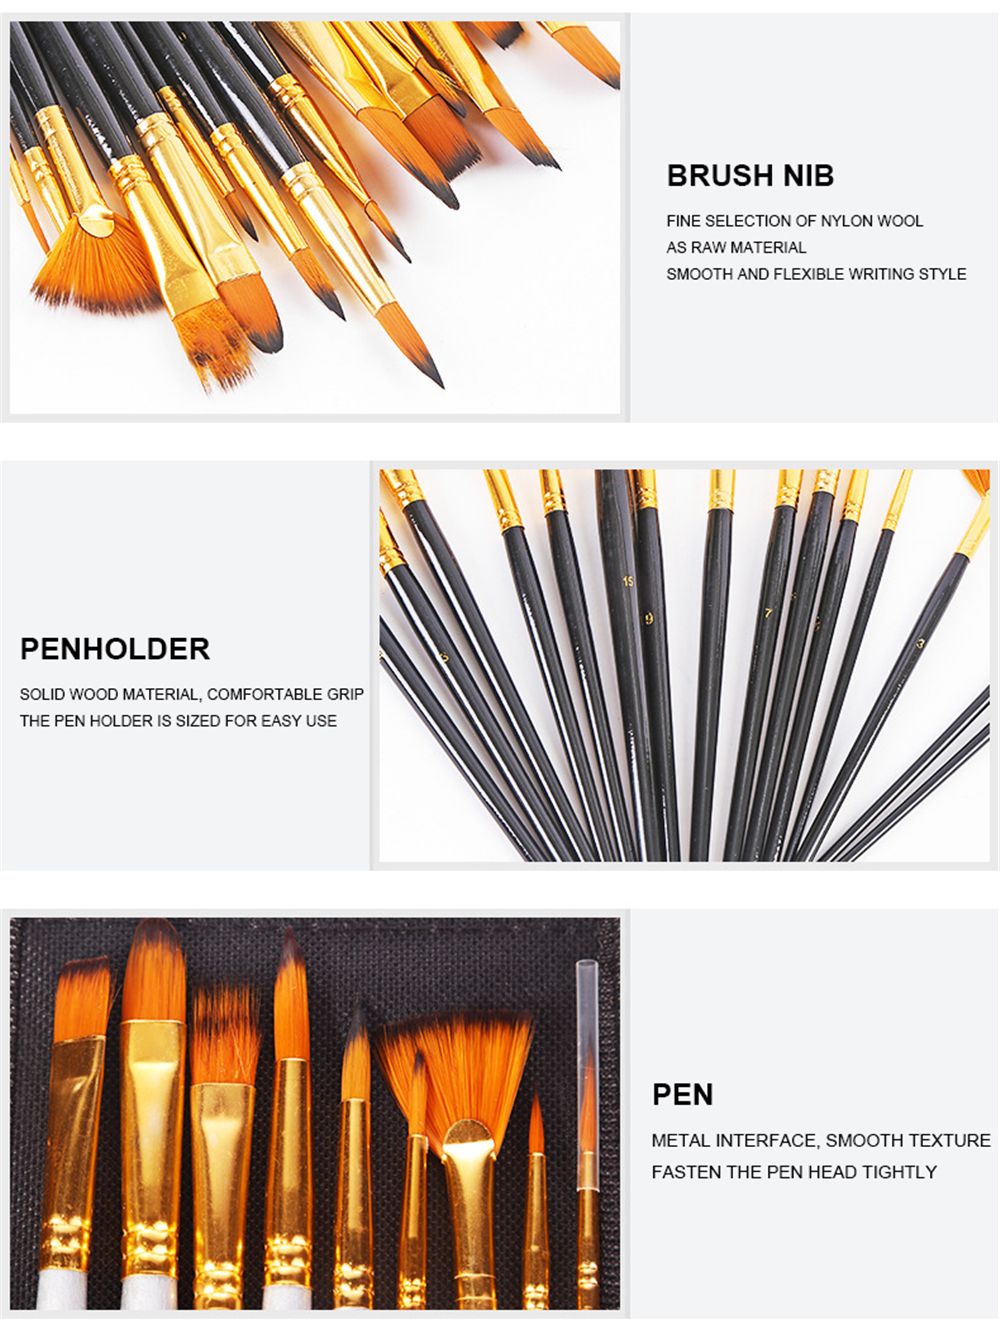 17Pcs-Paint-Brush-Set-Includes-Pop-up-Carrying-Case-with-Palette-Knife-and-1-Sponges-for-Acrylic-Oil-1763684-2